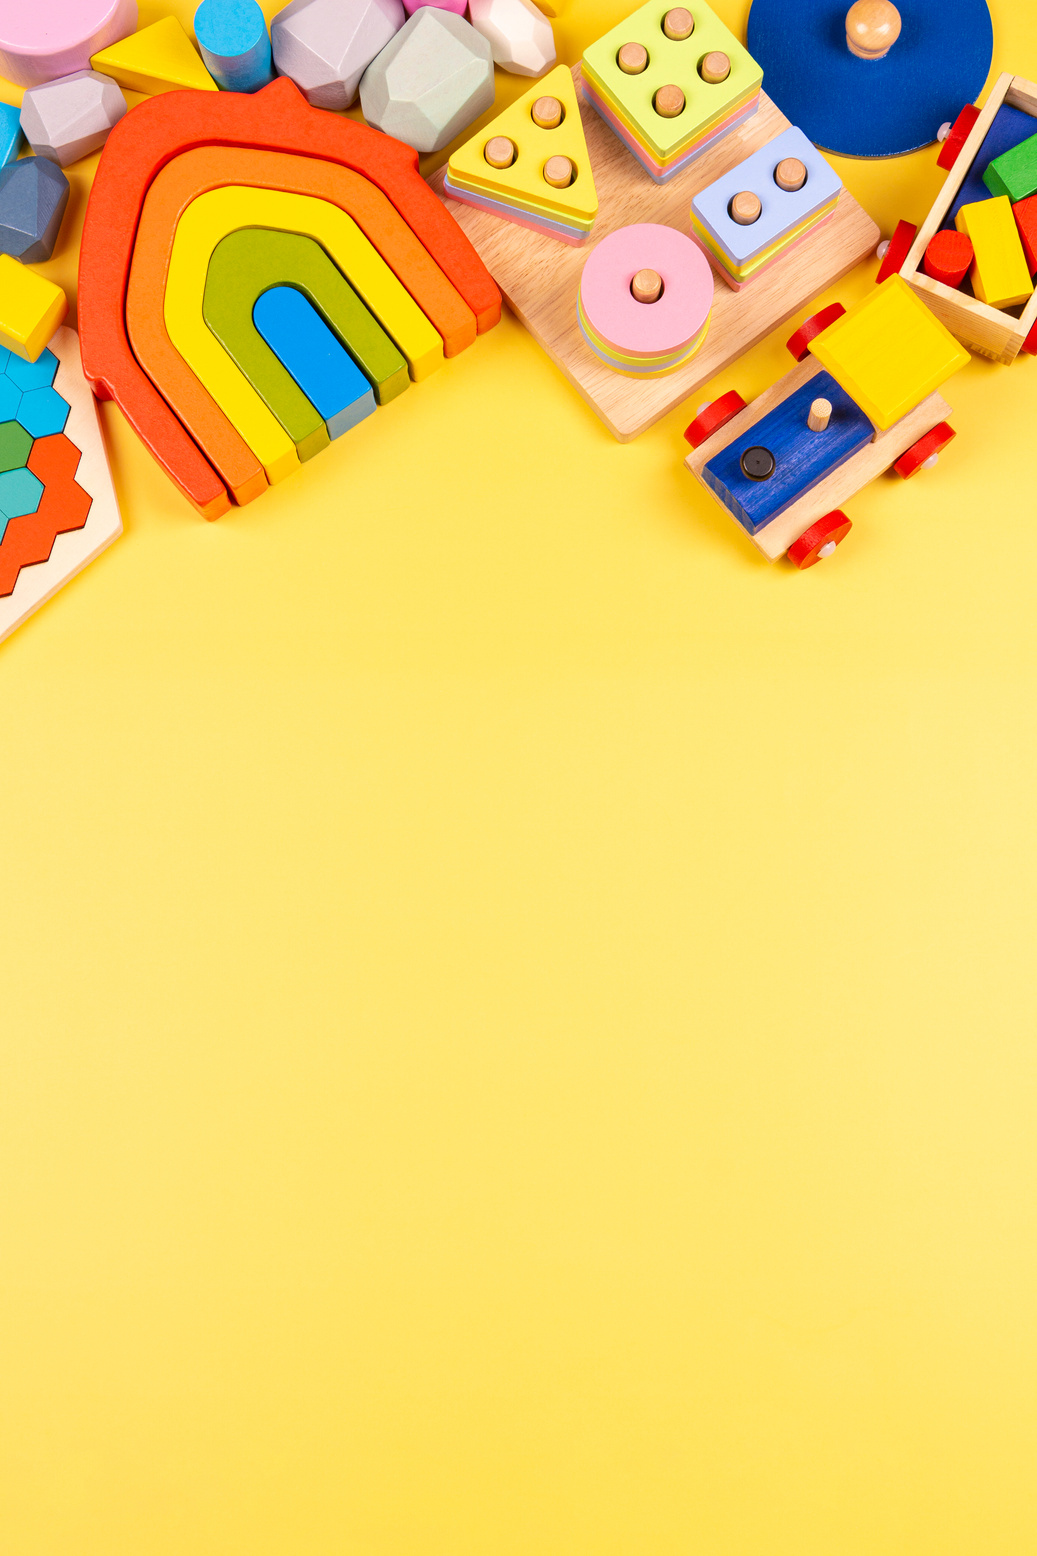 Children's Toys on Yellow Background